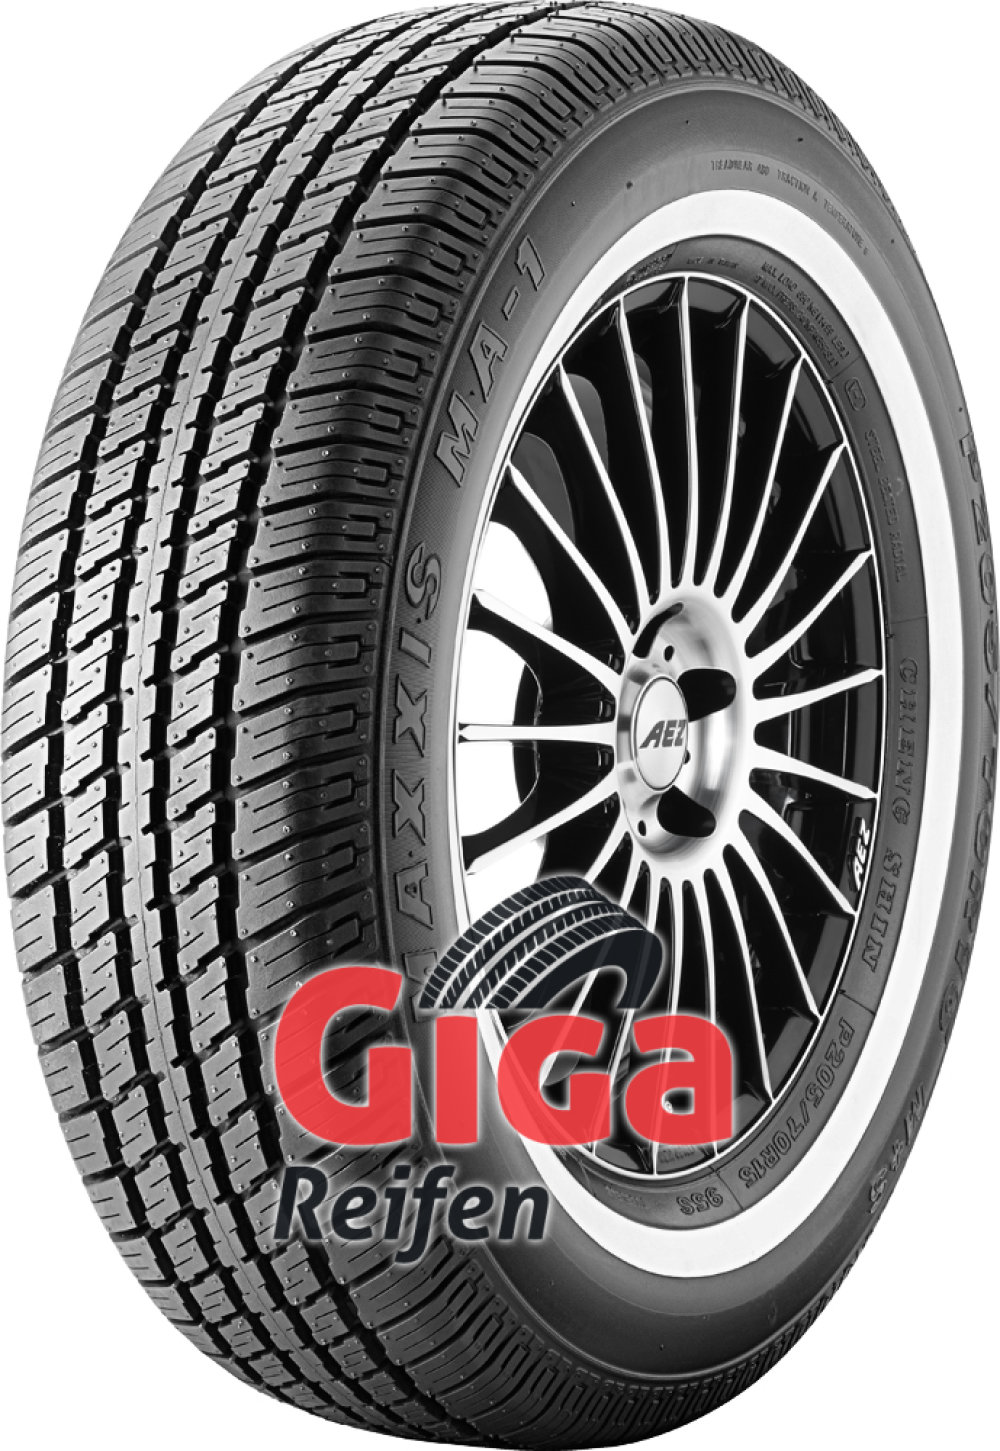 Maxxis MA 1 ( 205/75 R14 95S WSW 20mm ) von Maxxis